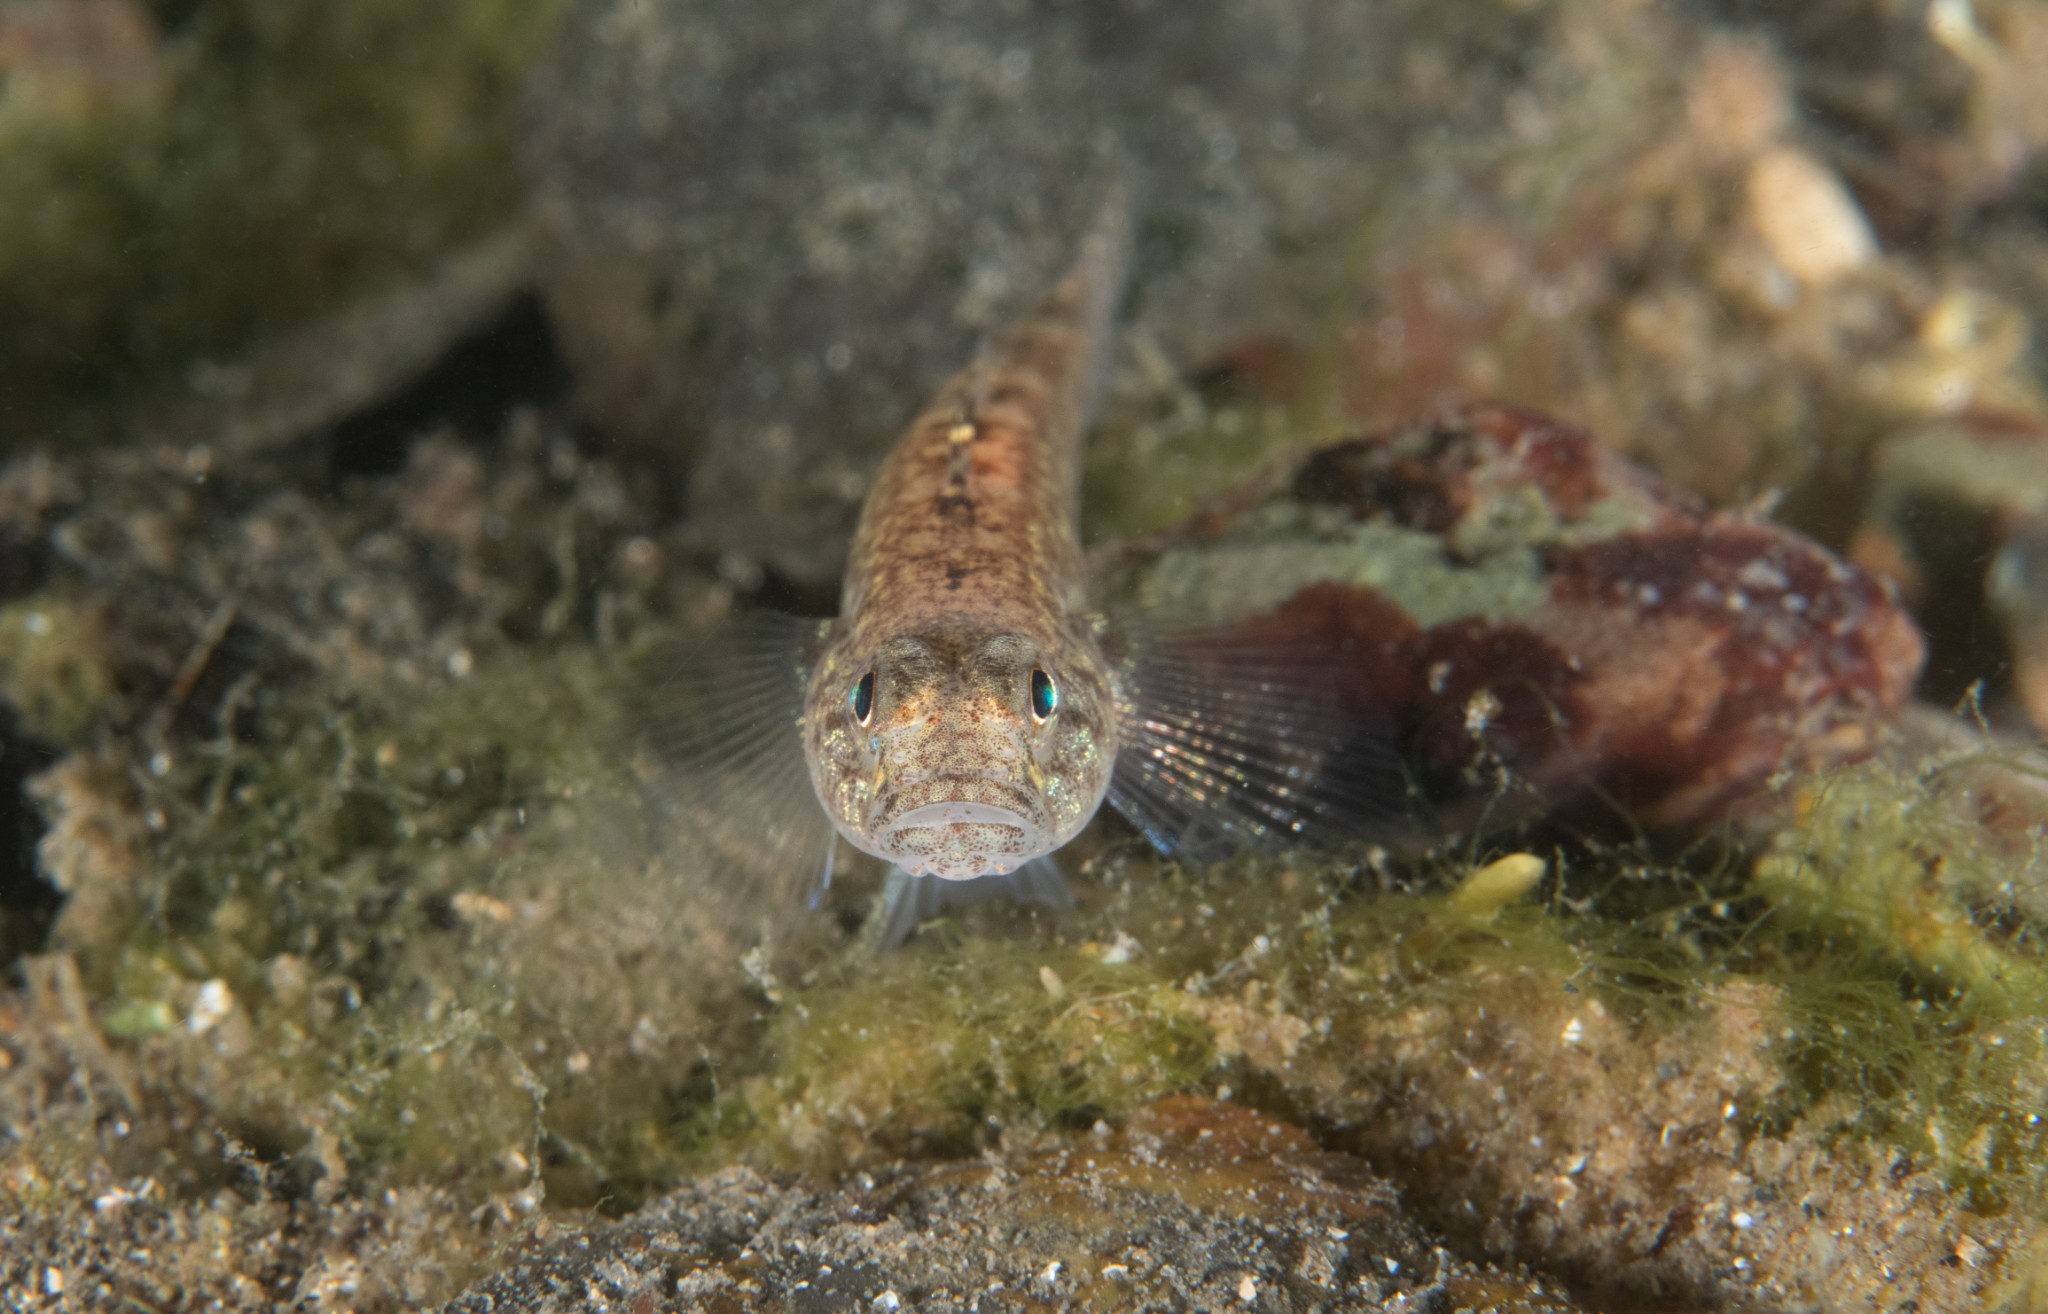 Goby - image by Raymond Besant